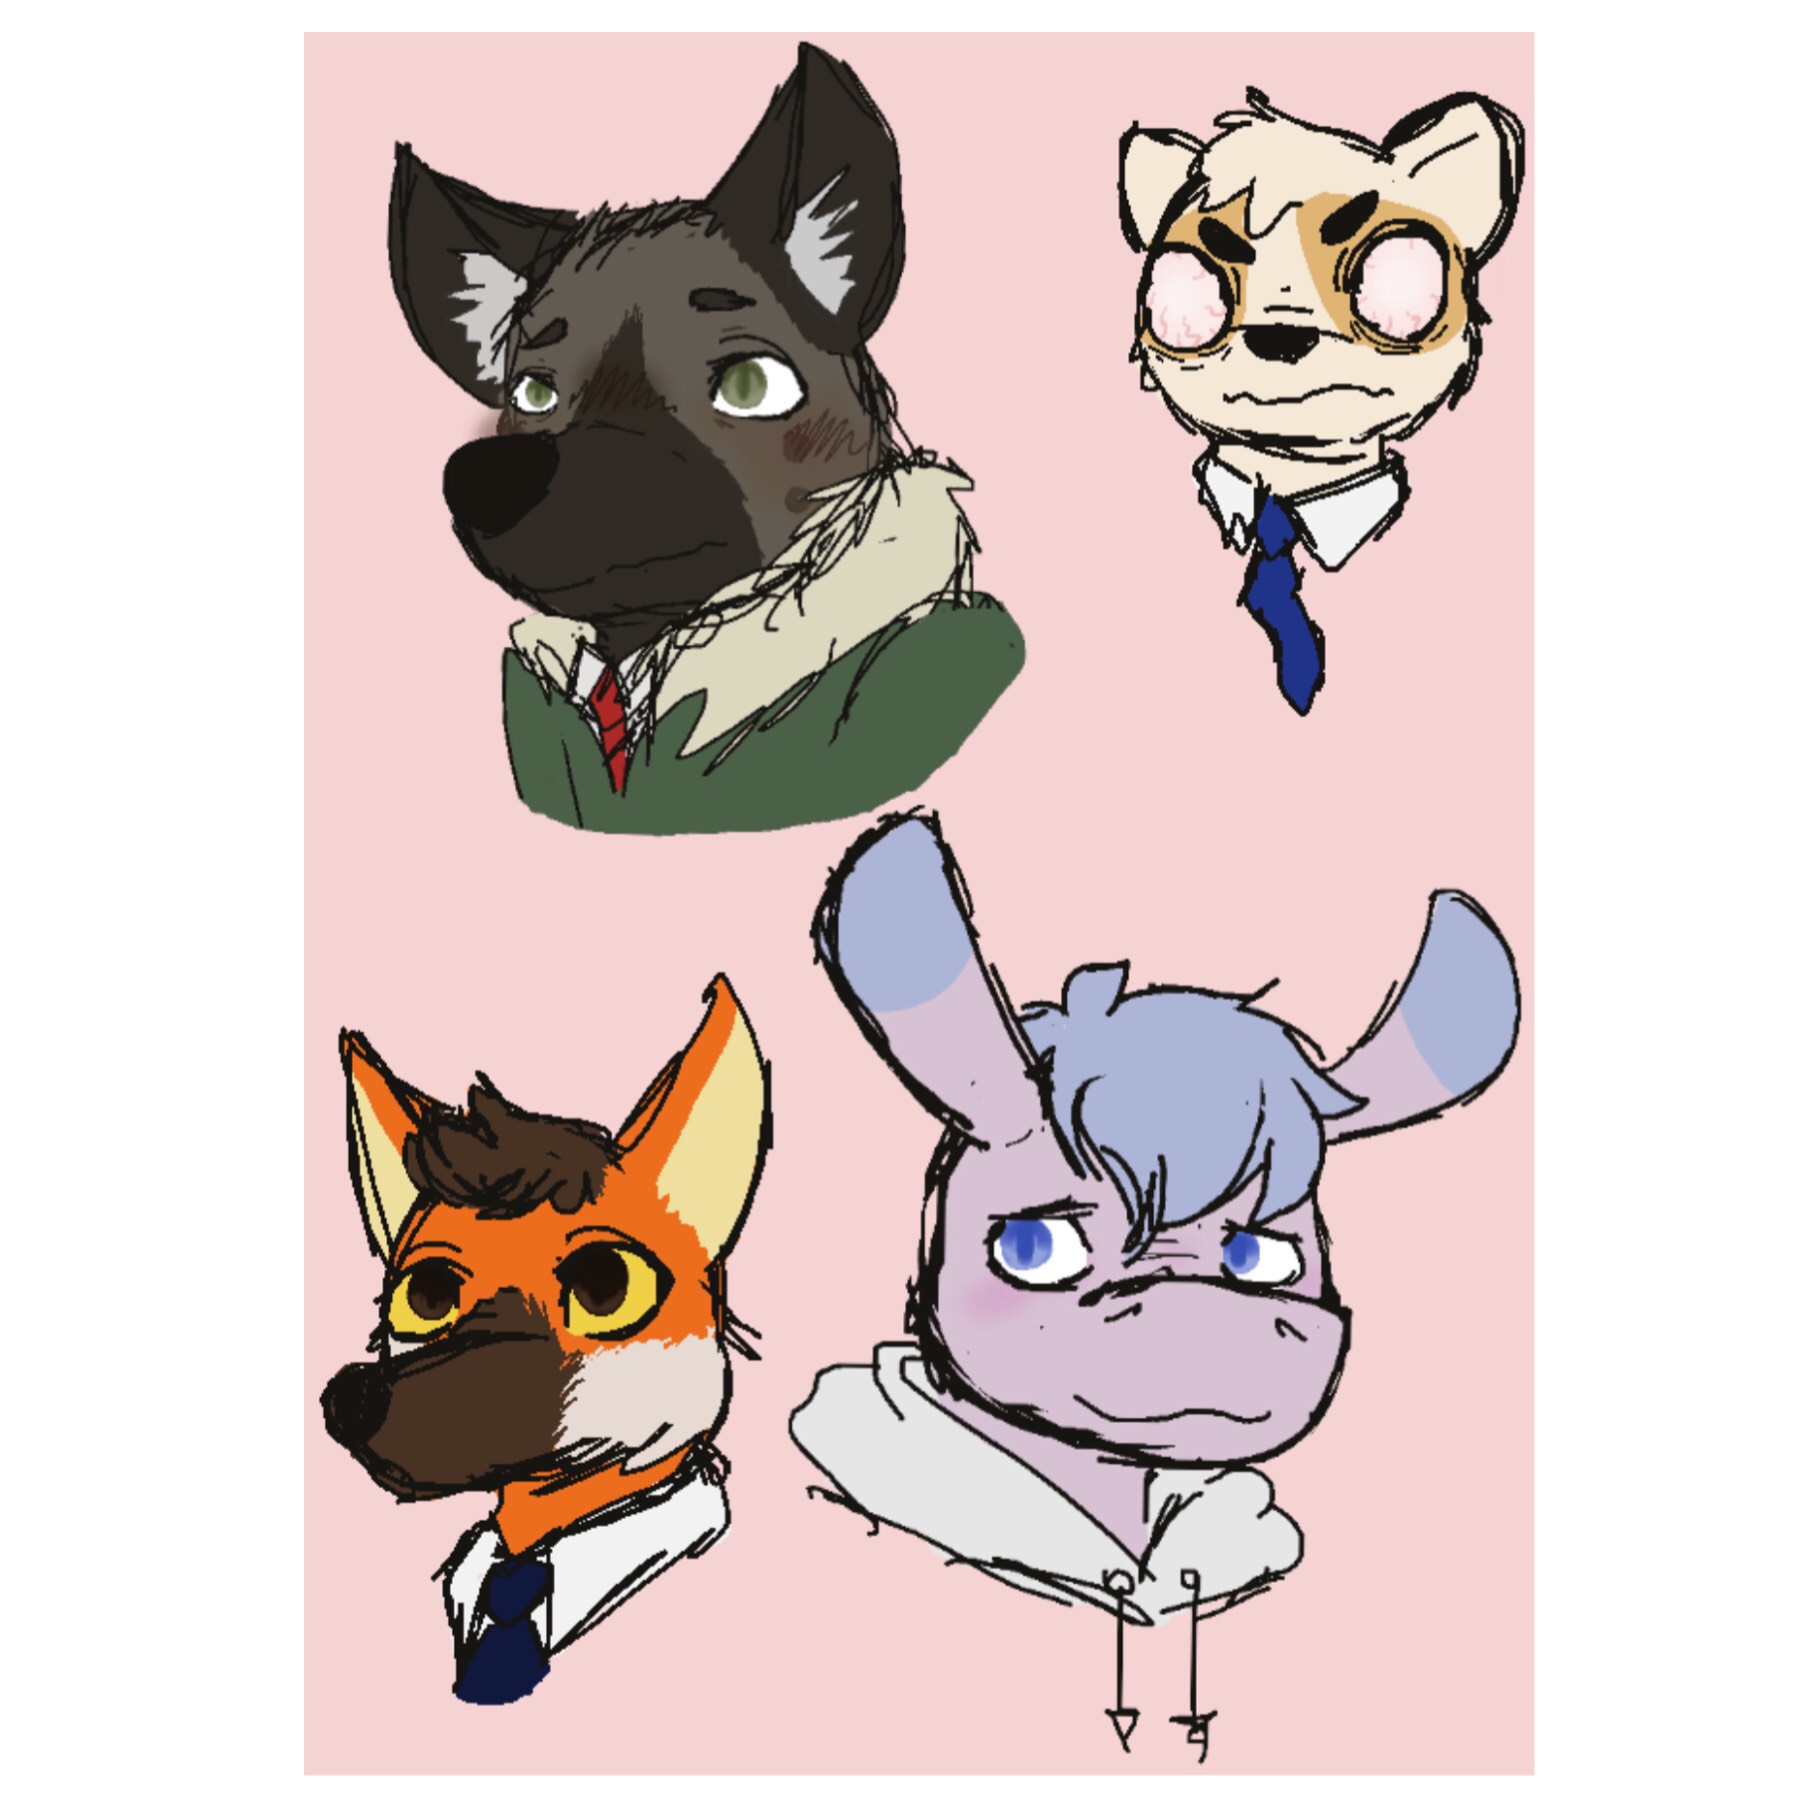 Tap
I watched all of season 2 of Aggretsuko yesterday, so I drew some of the boys UwU. 